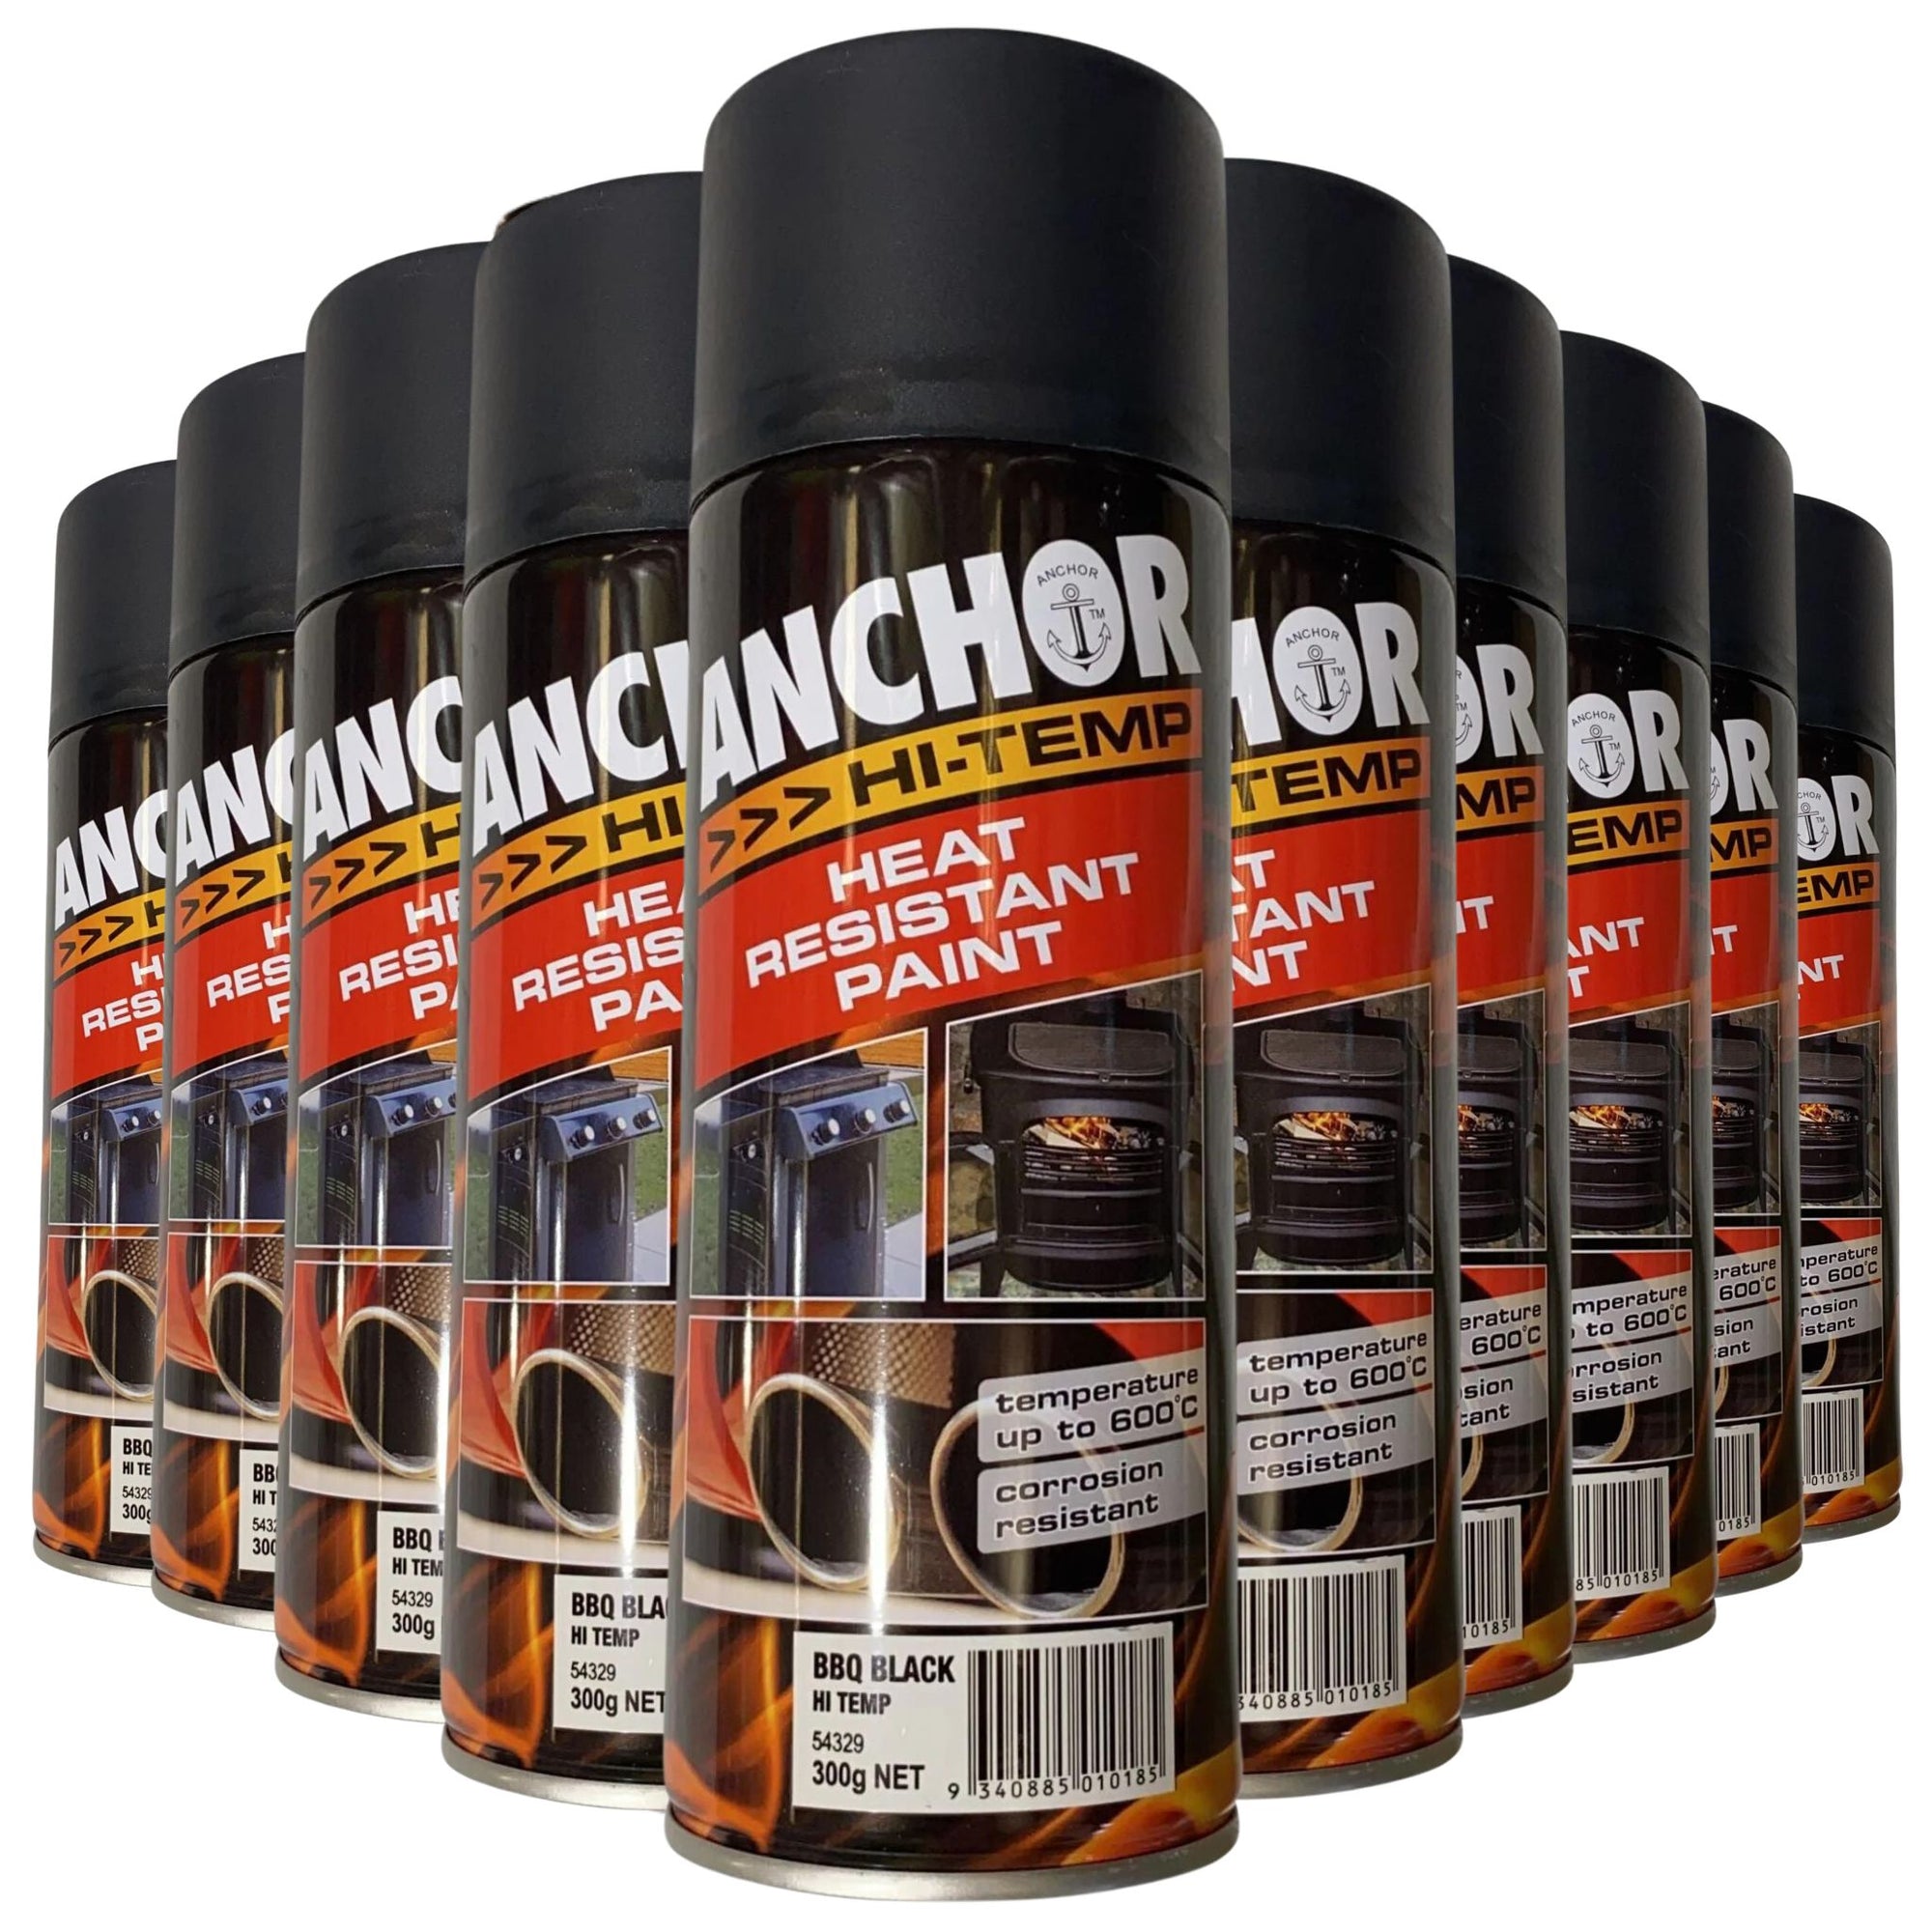 12 Cans | ANCHOR HI TEMP HEAT RESISTANT PAINT 54329  | Up to 600° | 300g - MATTE BBQ BLACK - South East Clearance Centre